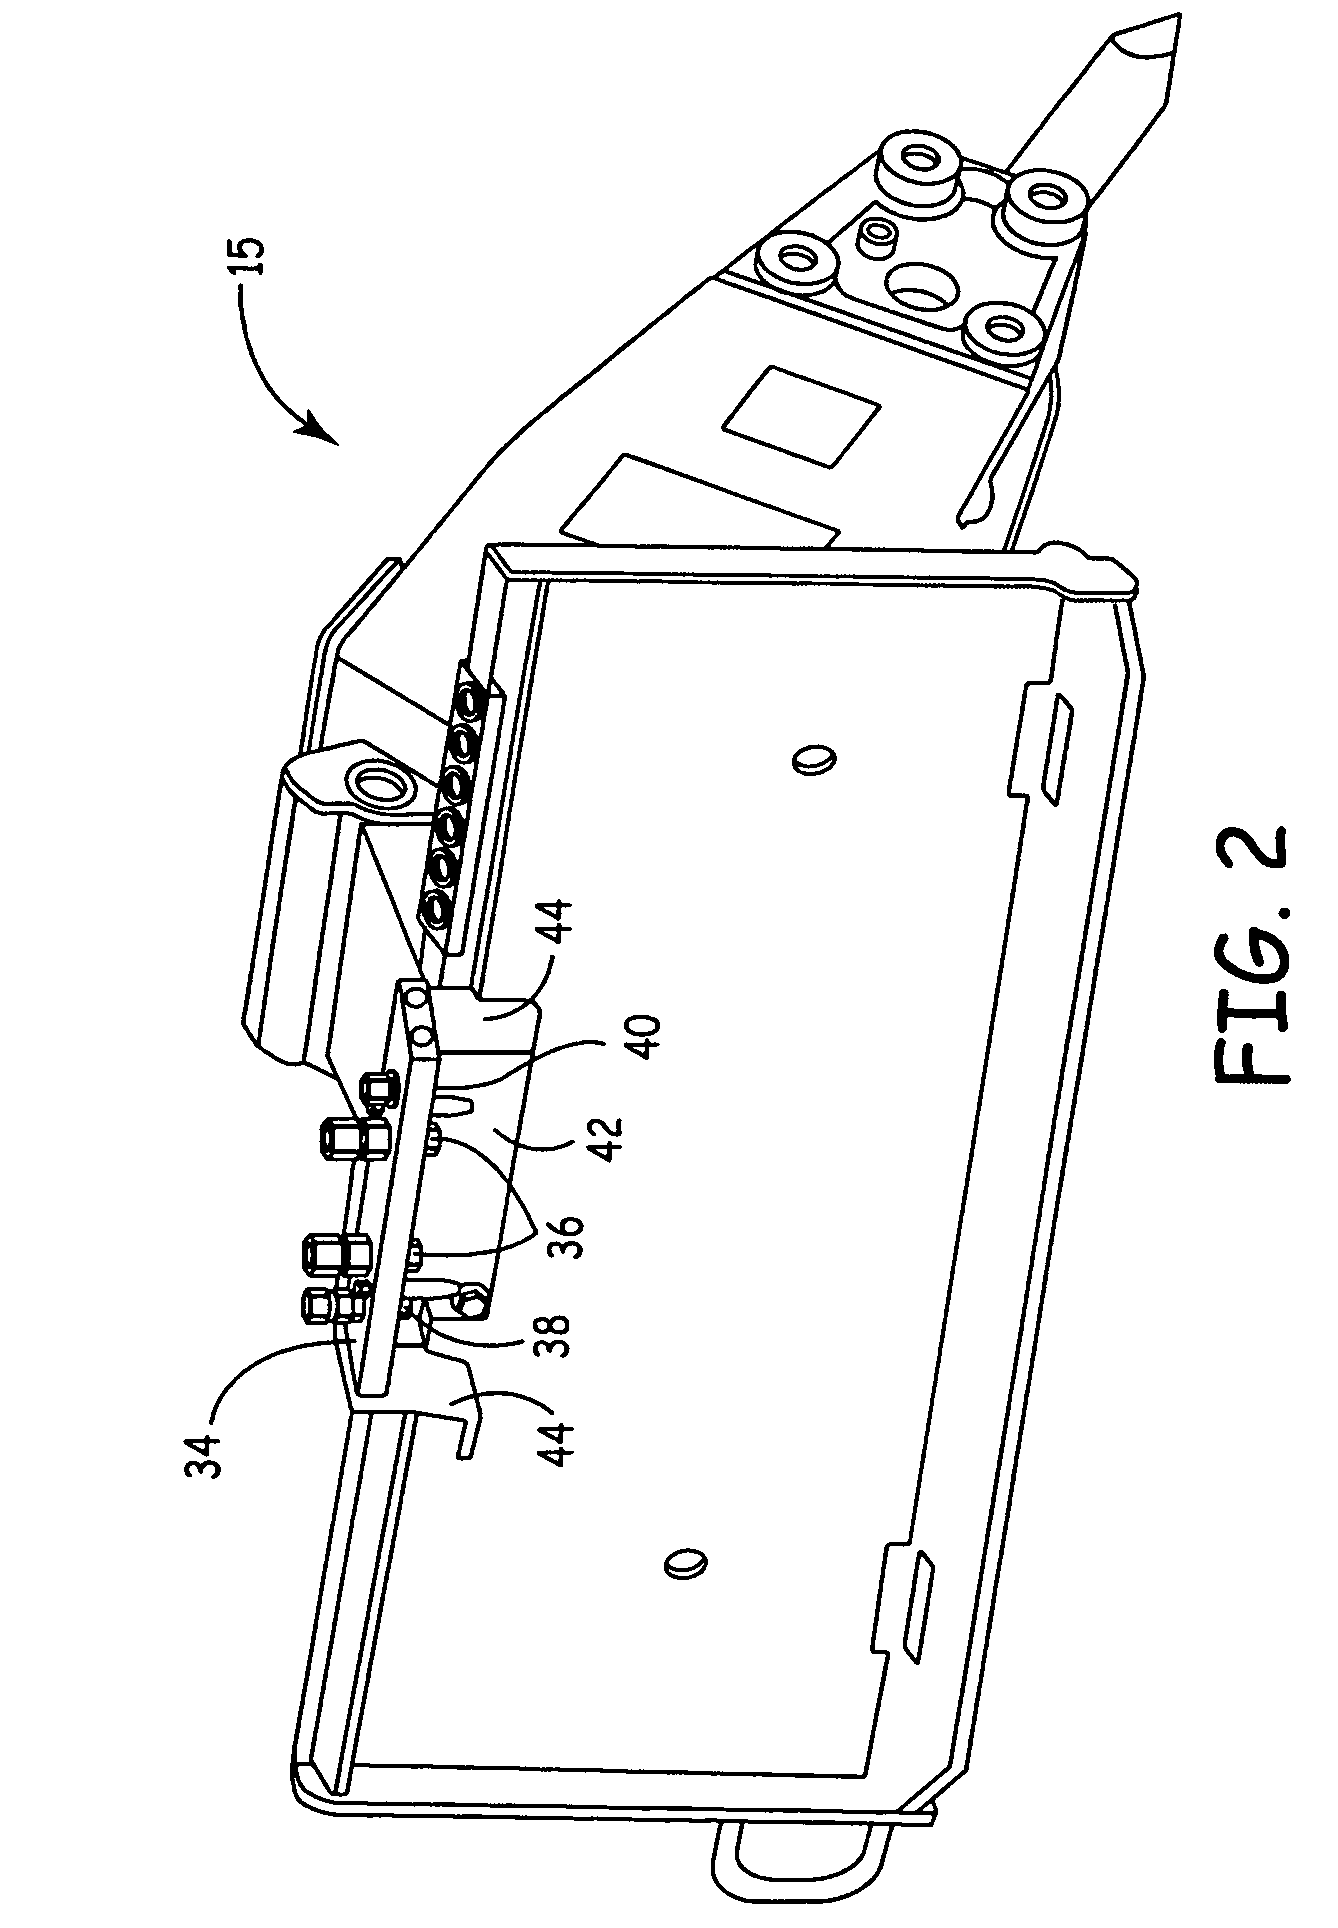 Powered coupling of attachment hydraulics